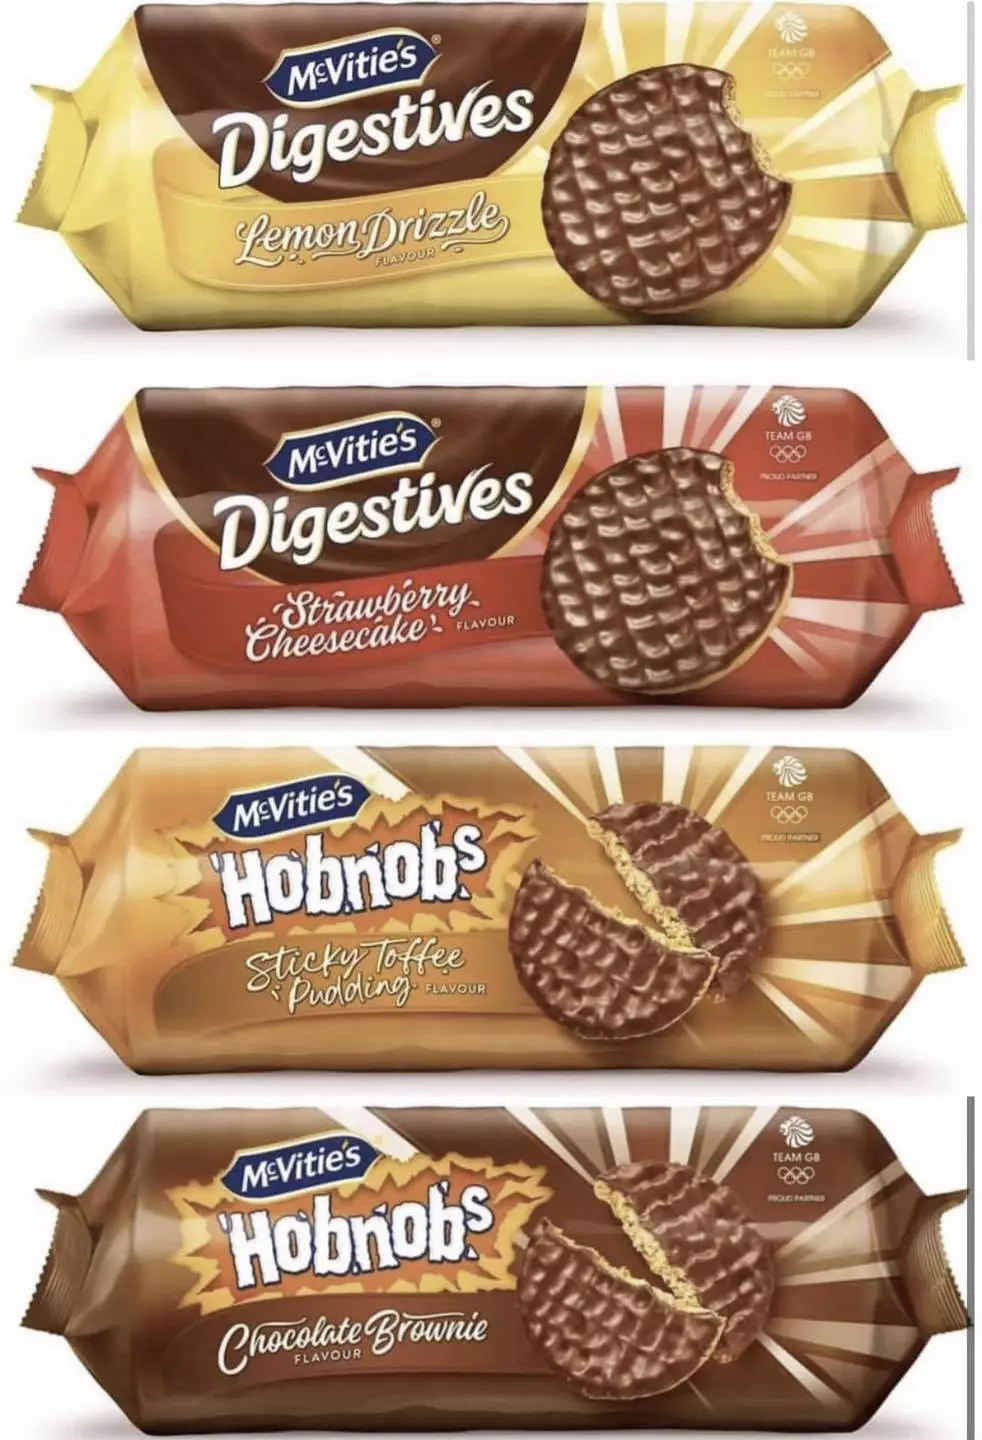 McVitie's is bringing out four new flavours of biscuits (